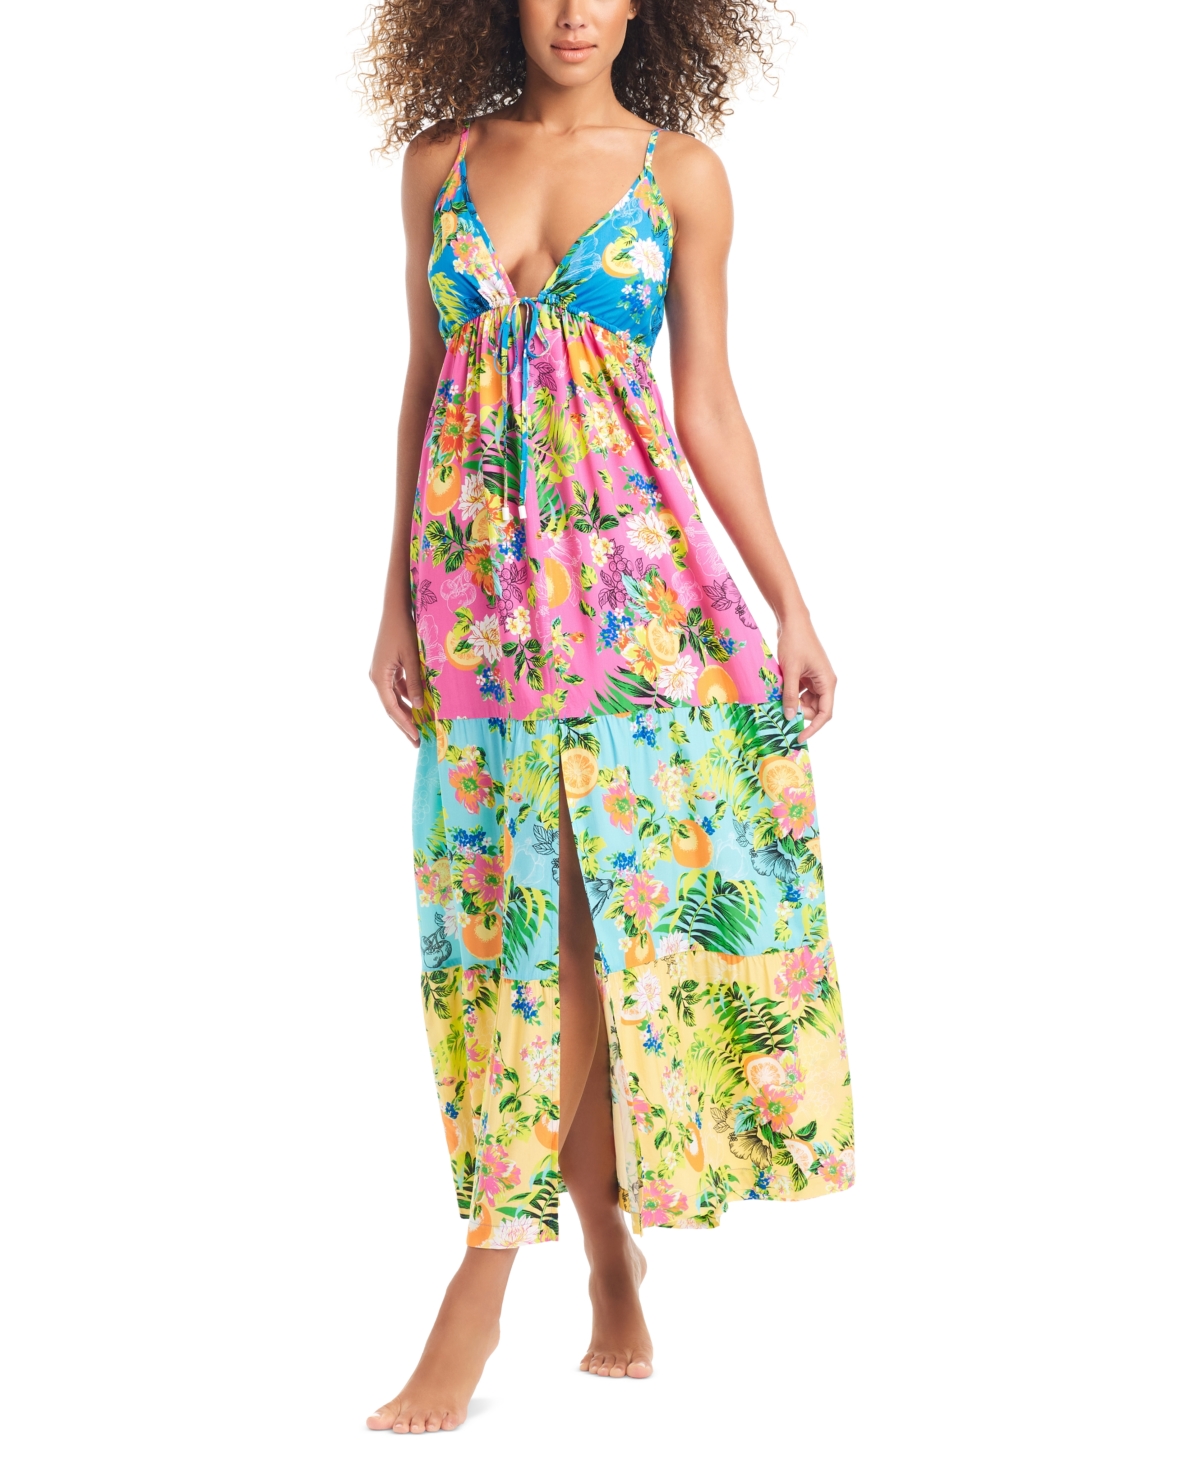 Women's Tiered Printed Ruffle Cover-Up Dress, Created for Macy's - Multi